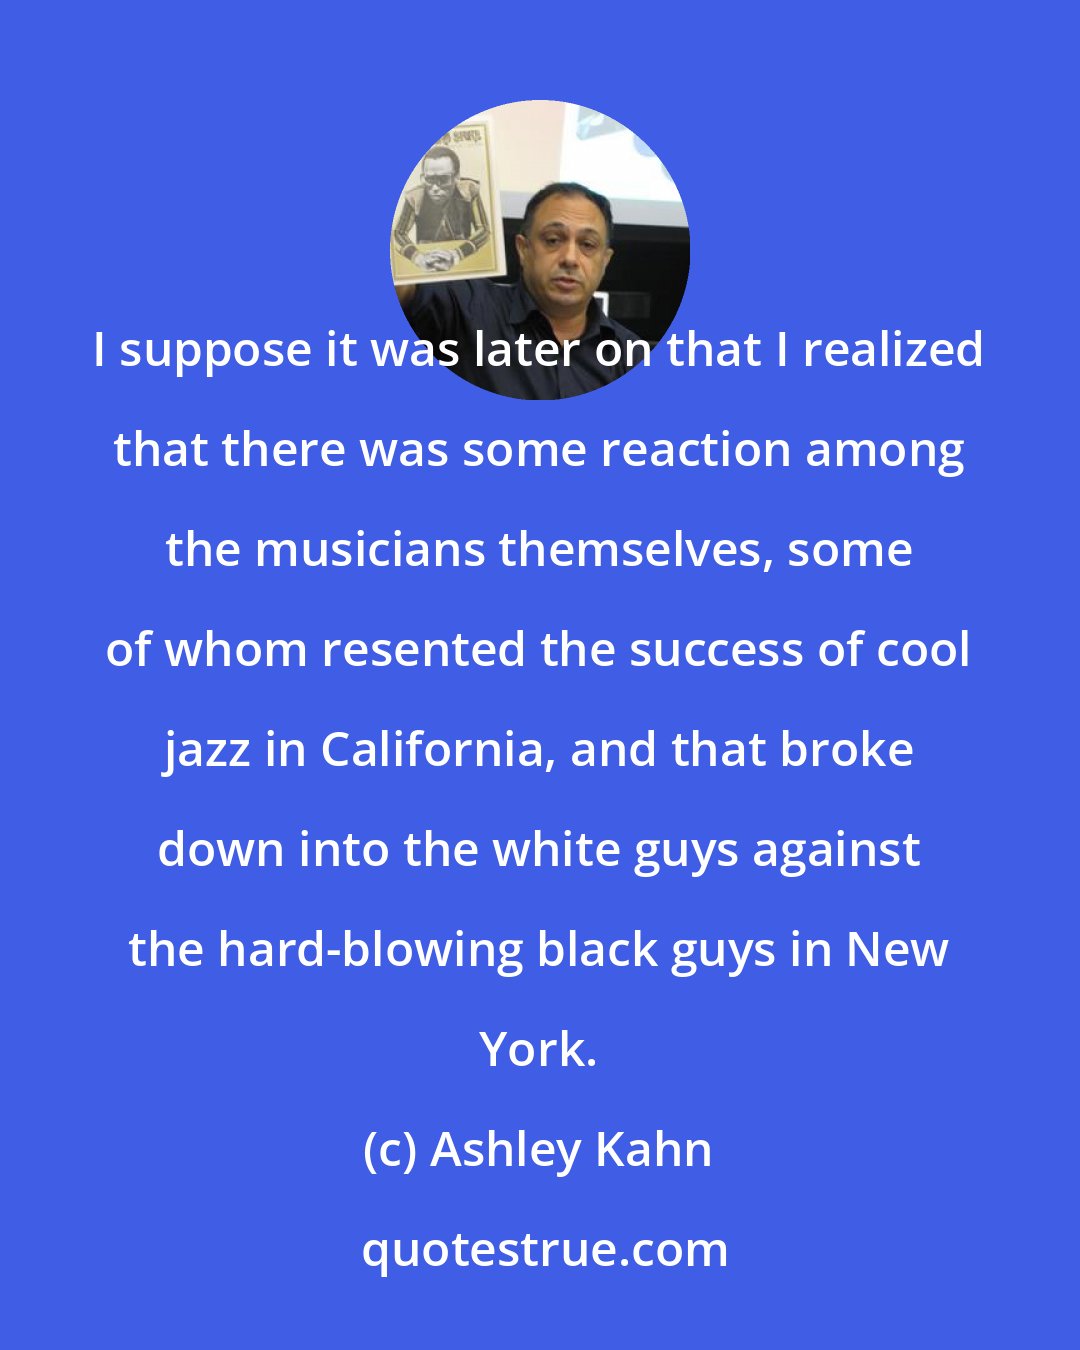 Ashley Kahn: I suppose it was later on that I realized that there was some reaction among the musicians themselves, some of whom resented the success of cool jazz in California, and that broke down into the white guys against the hard-blowing black guys in New York.